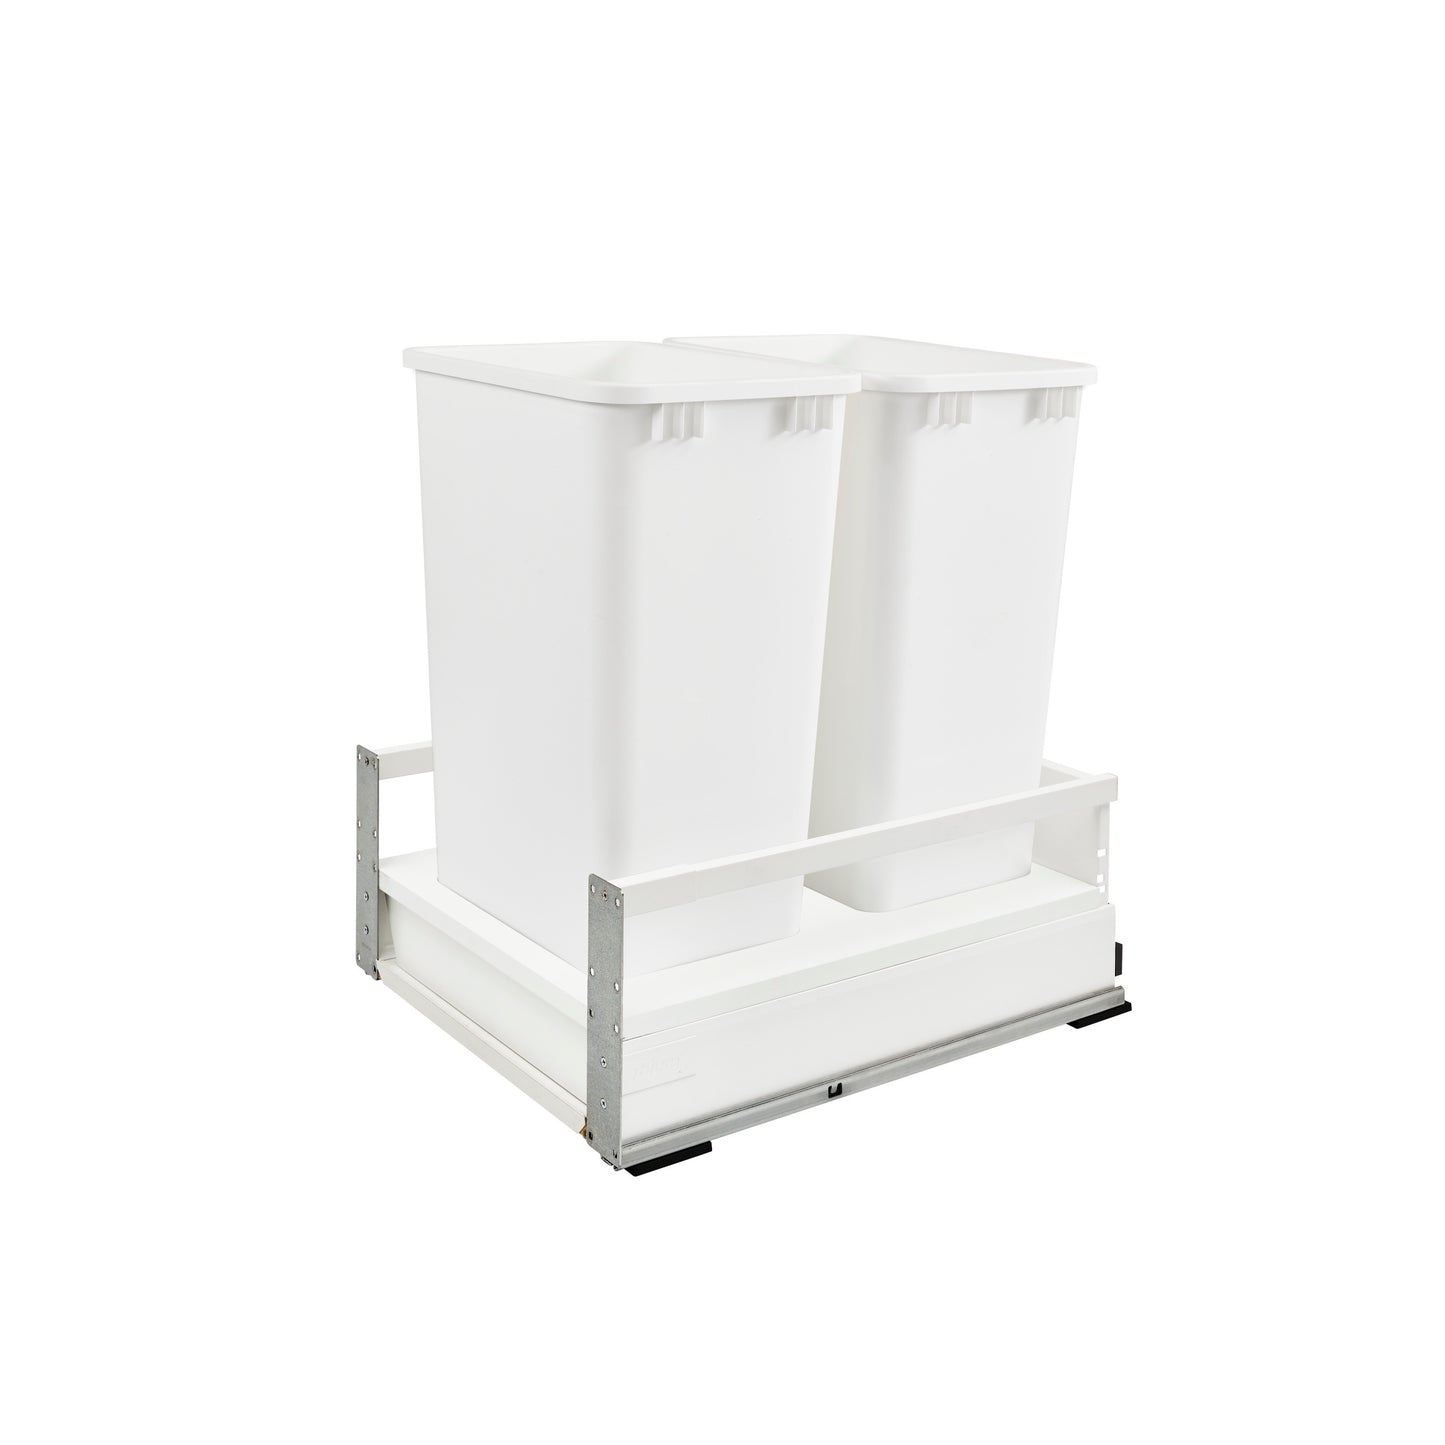 Rev-A-Shelf / TWCSD-2150DM-2 / Tandem Pullout Waste/Trash Container w/ Soft-Close and SERVO-DRIVE System